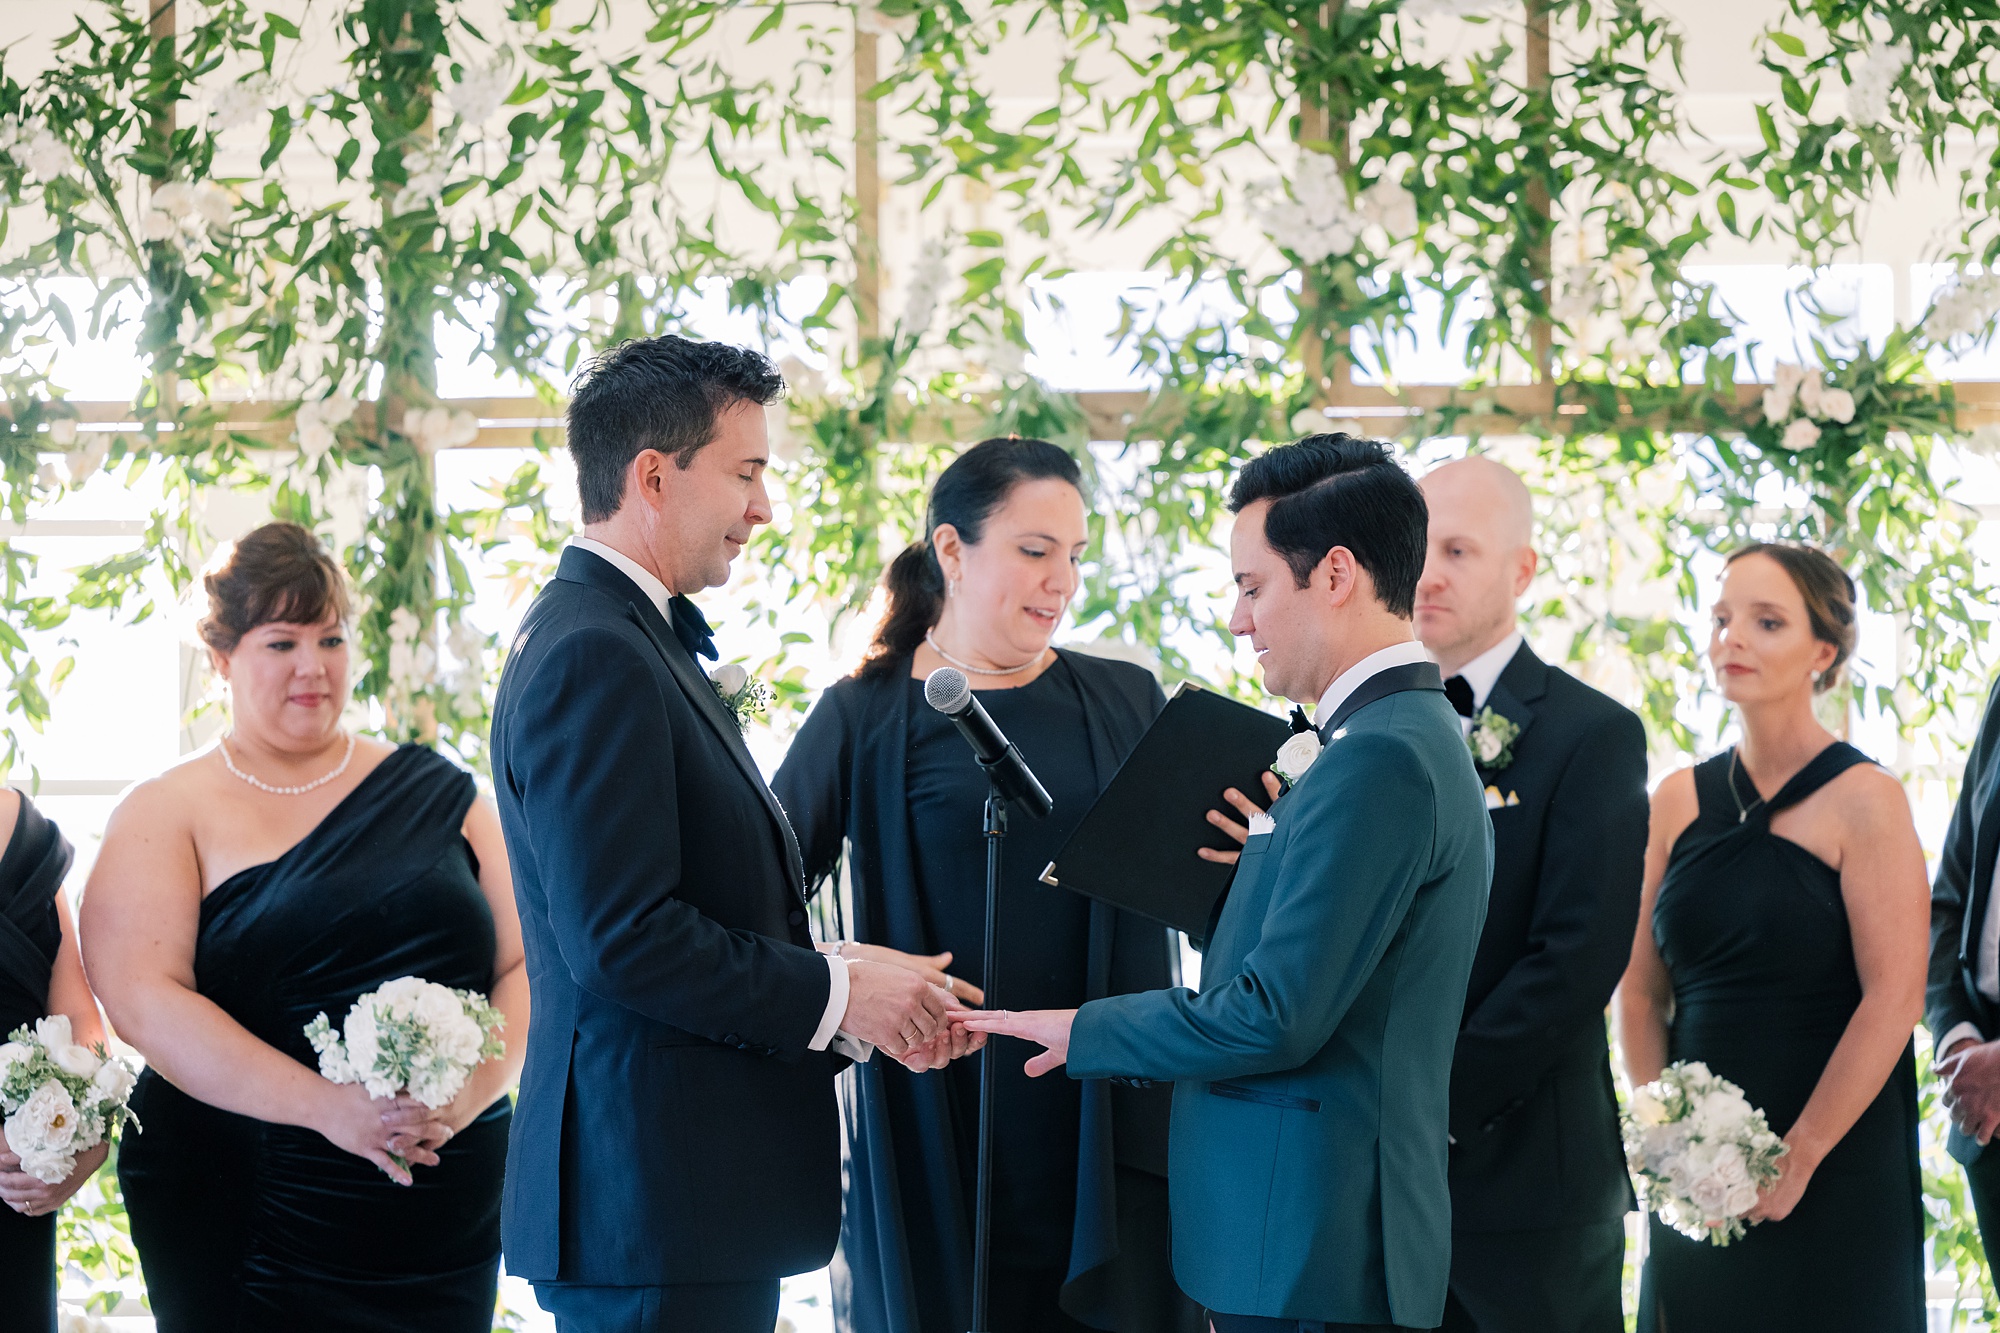 grooms exchange vows during ceremony at the Hay Adams Hotel